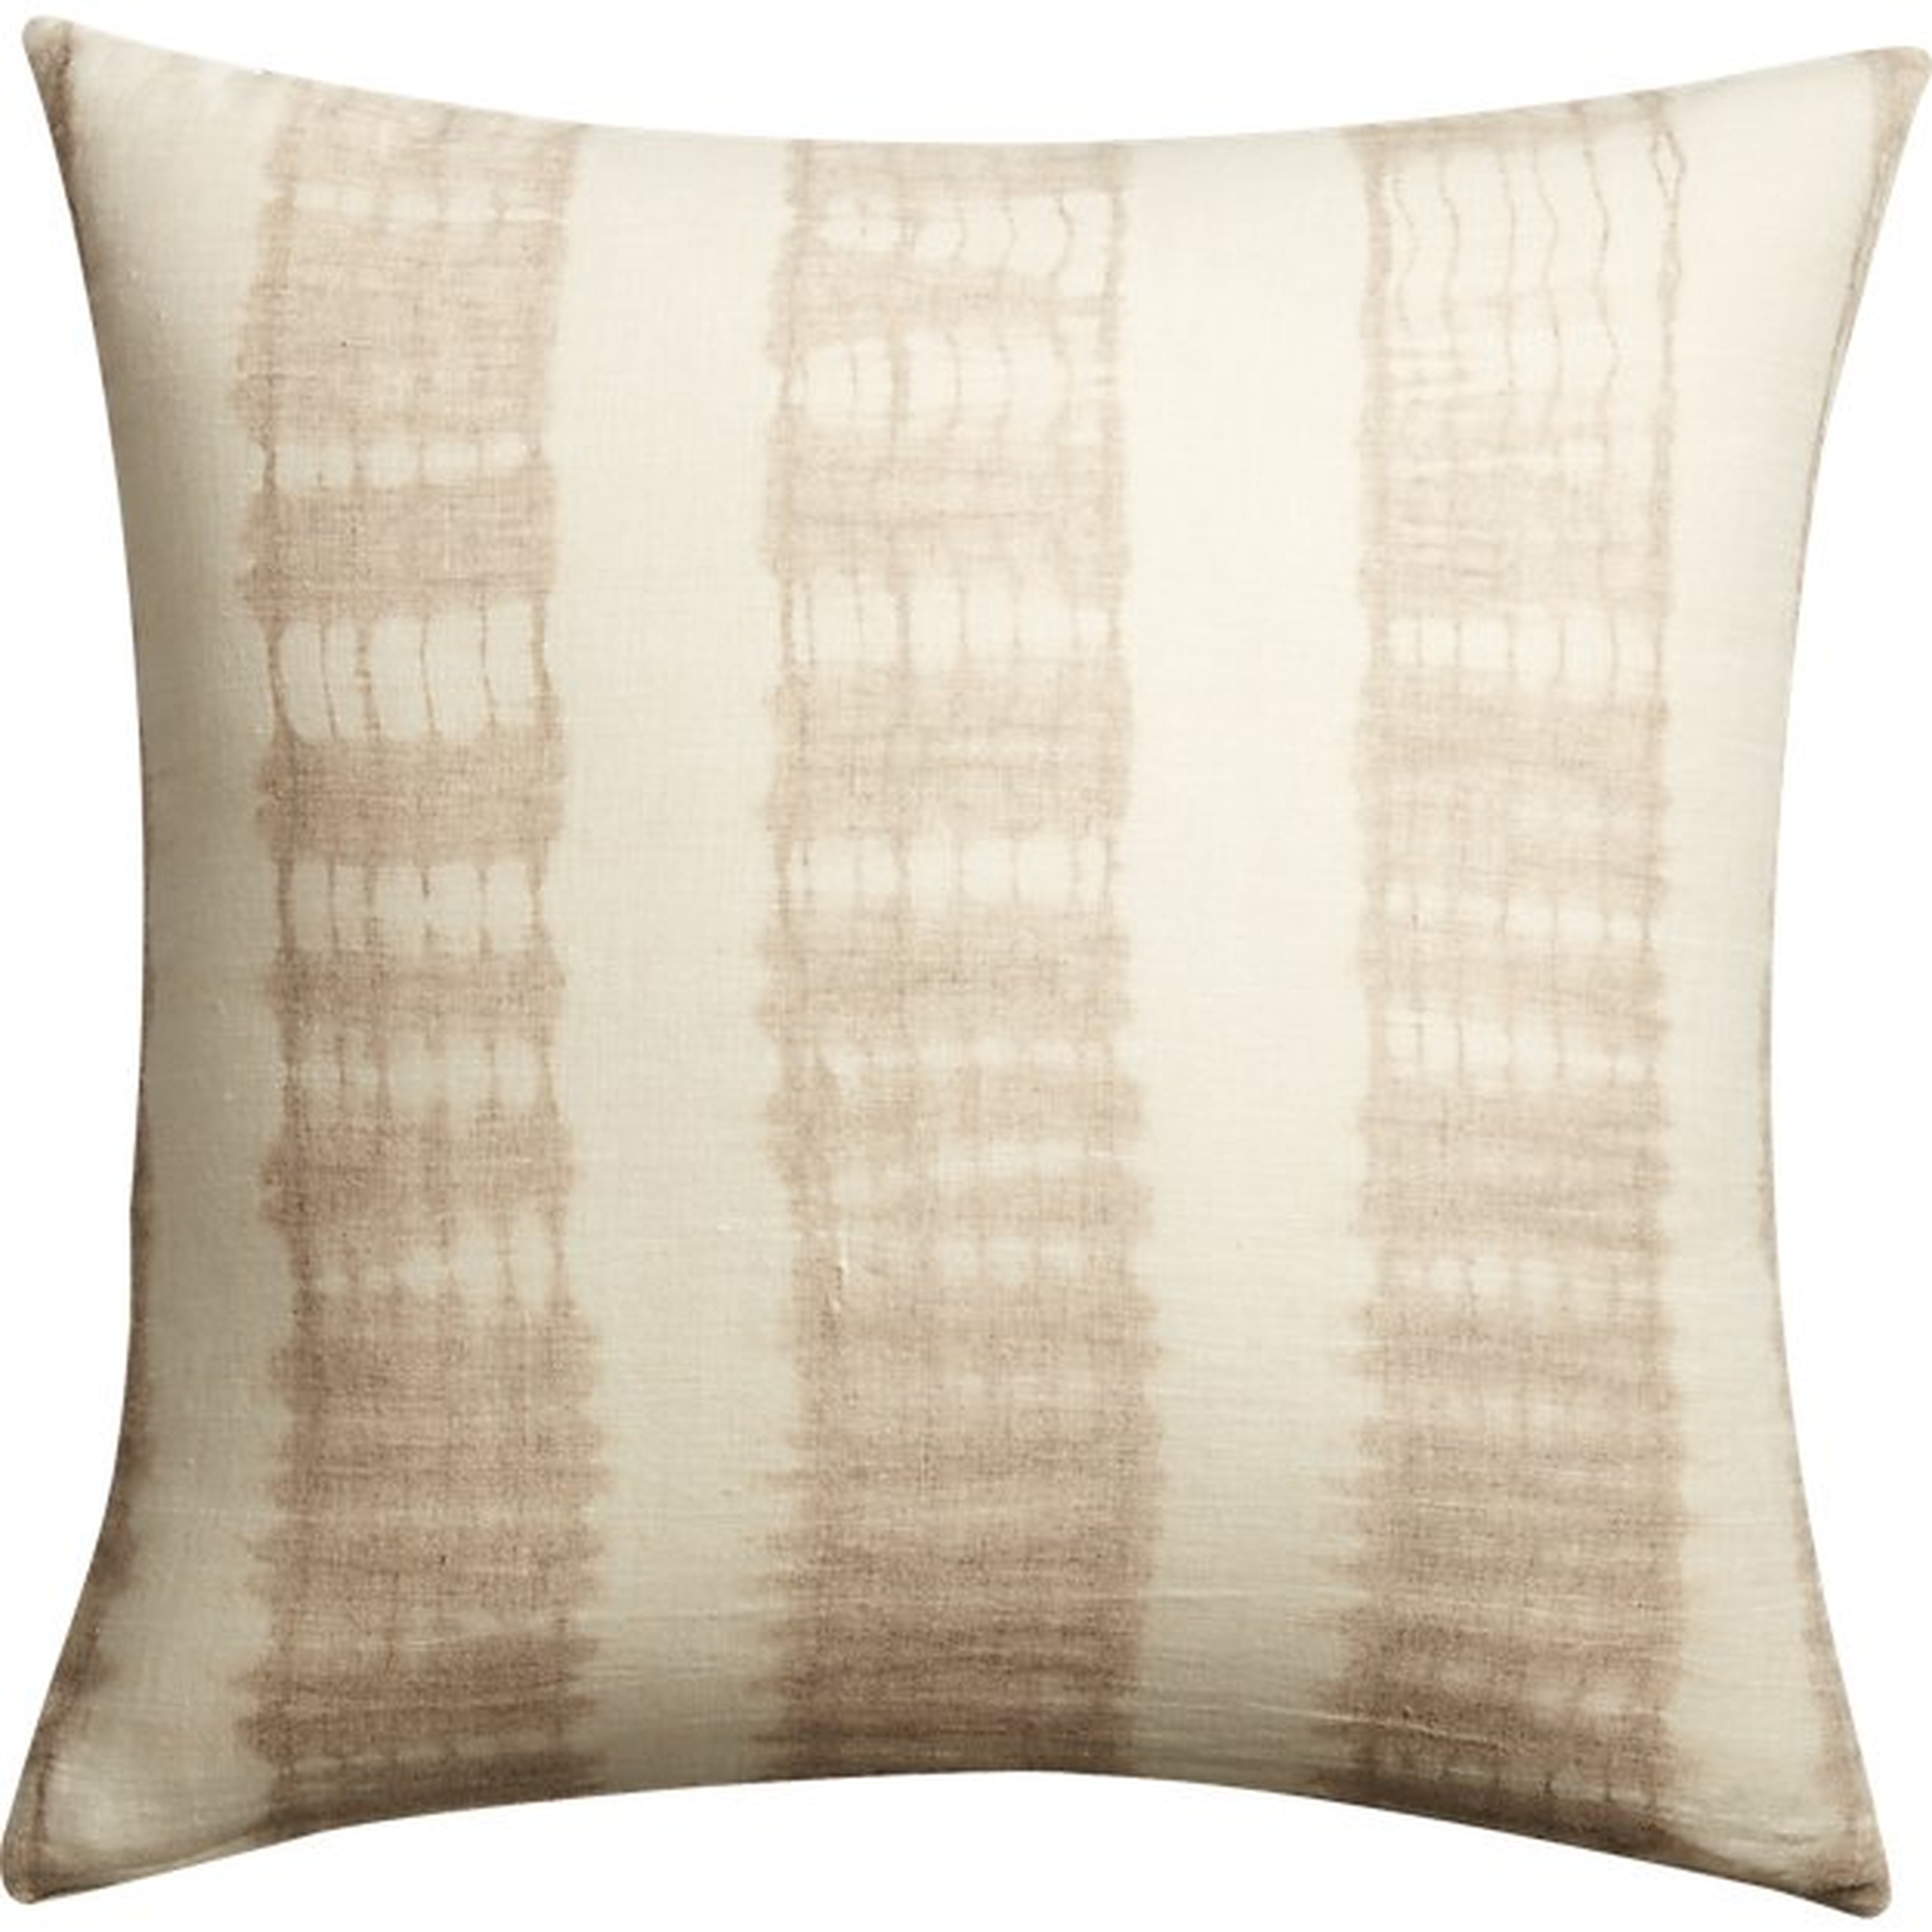 23" natural tie dye pillow with feather-down insert - CB2